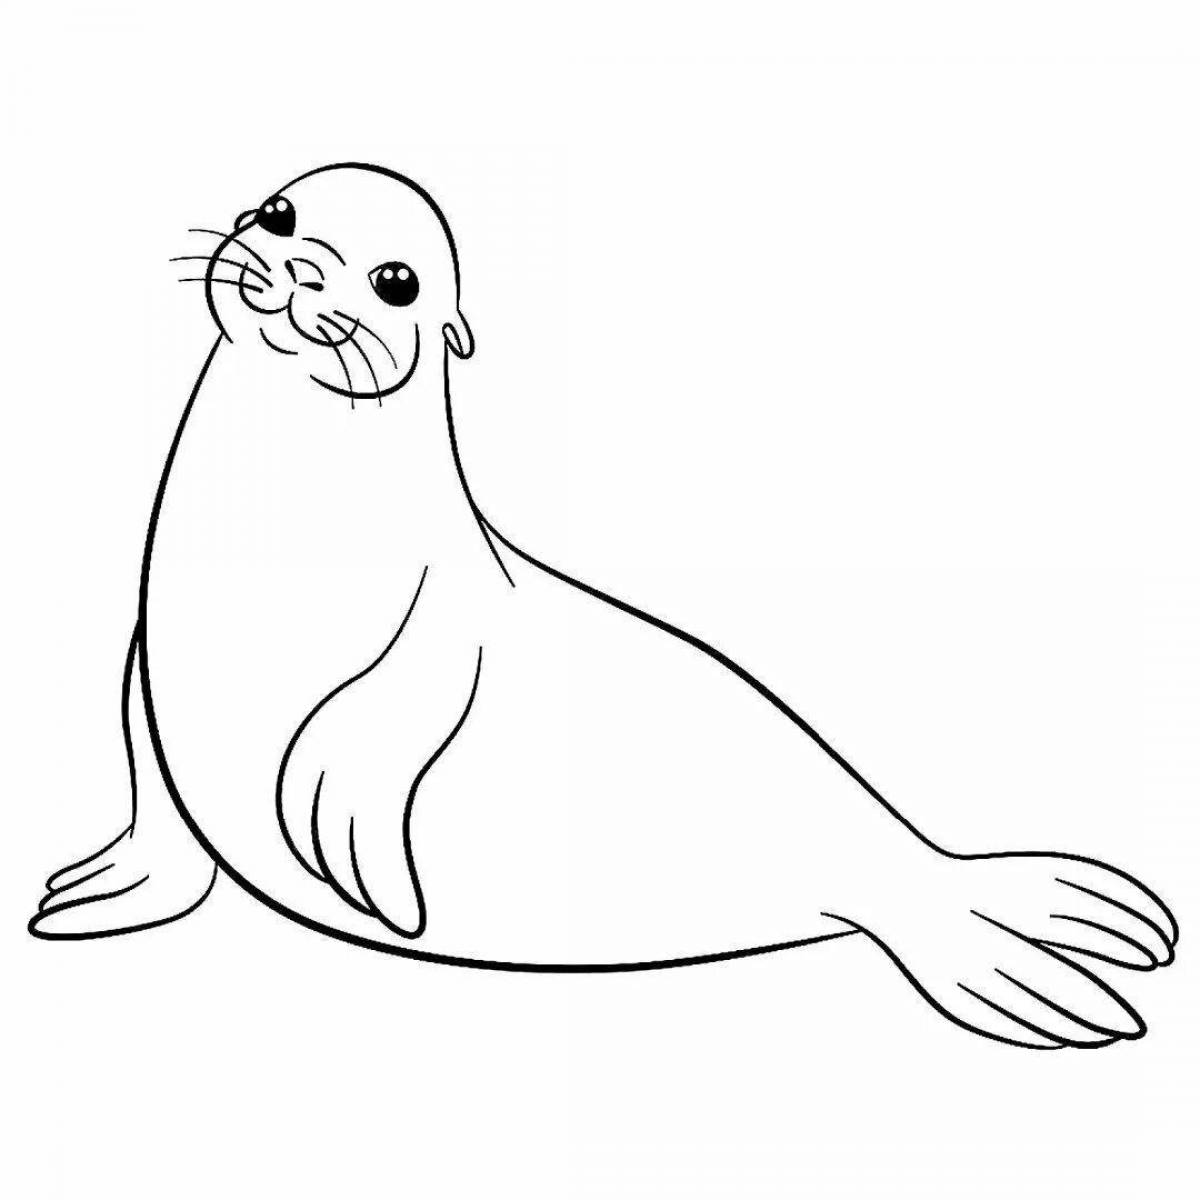 A striking sea lion coloring book for kids